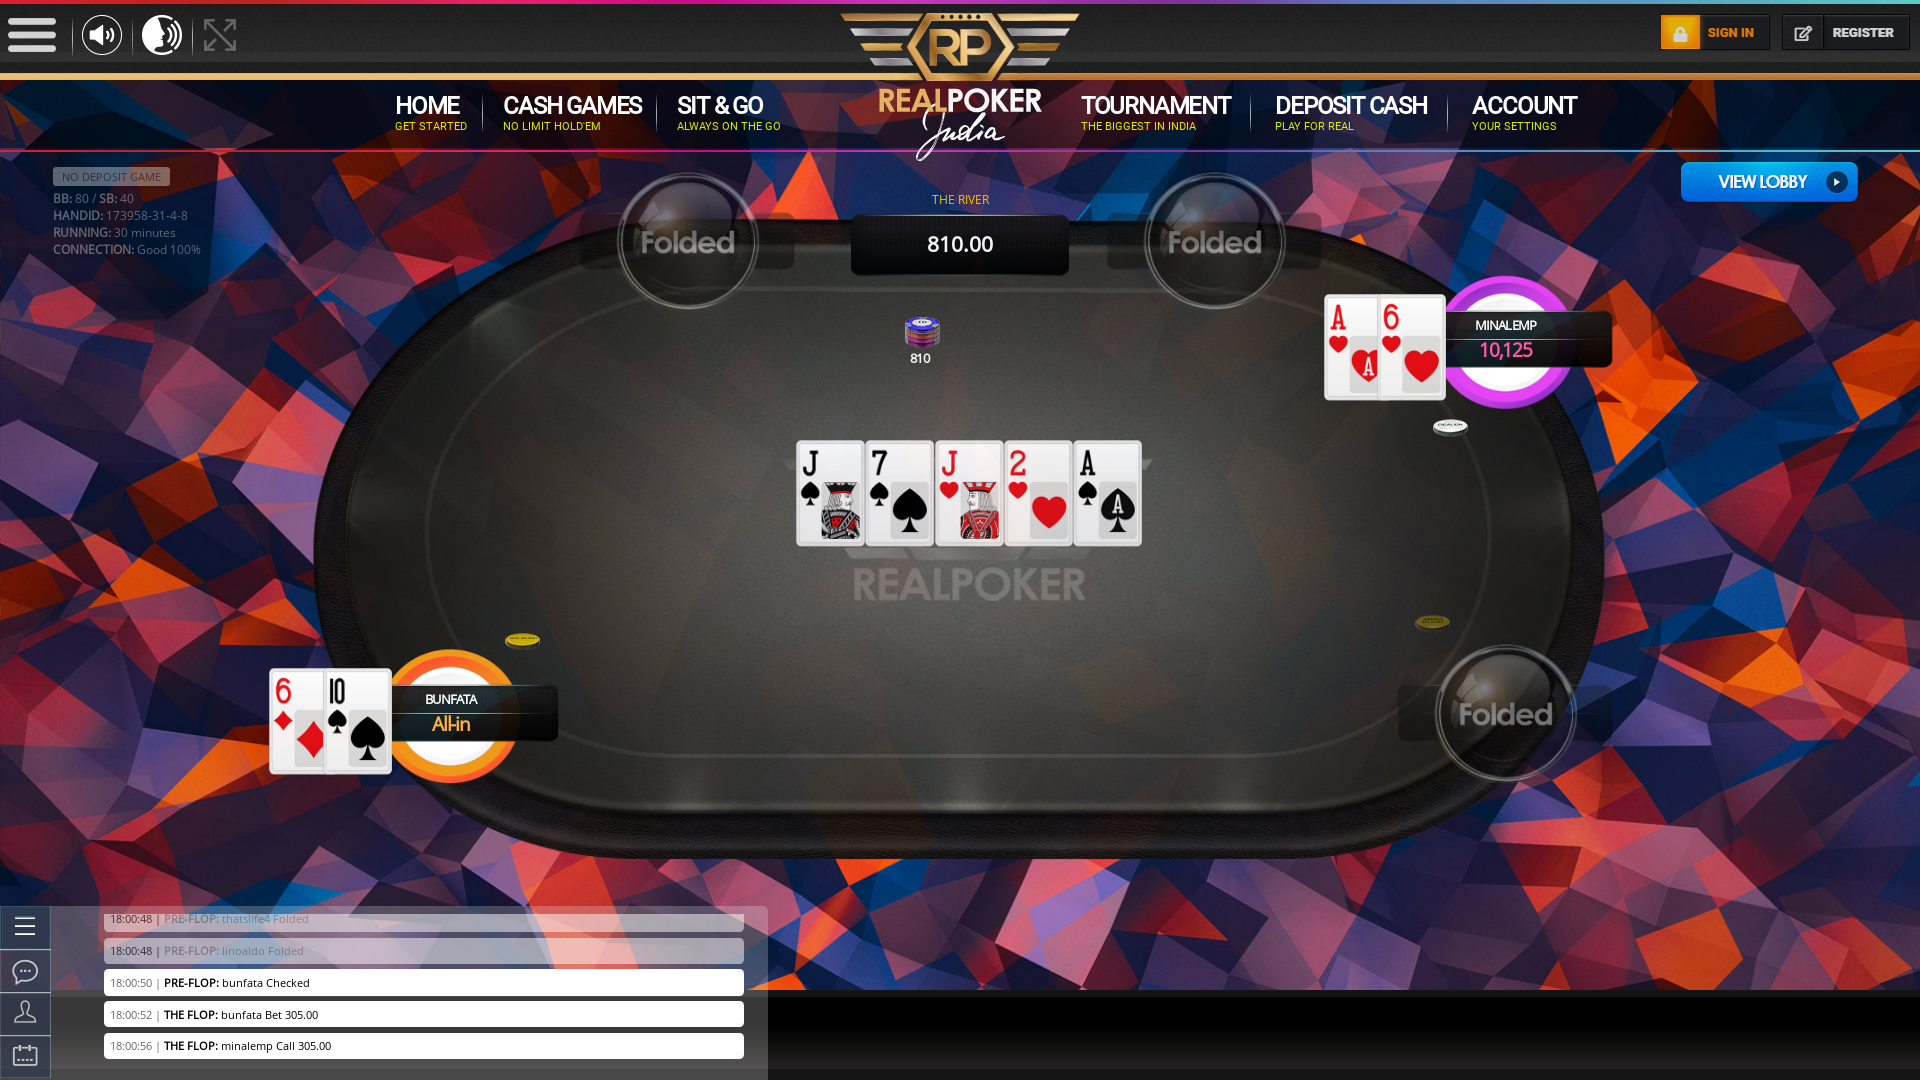 Boat Club Road, Pune online poker game on a 10 player table in the 30th minute of the game